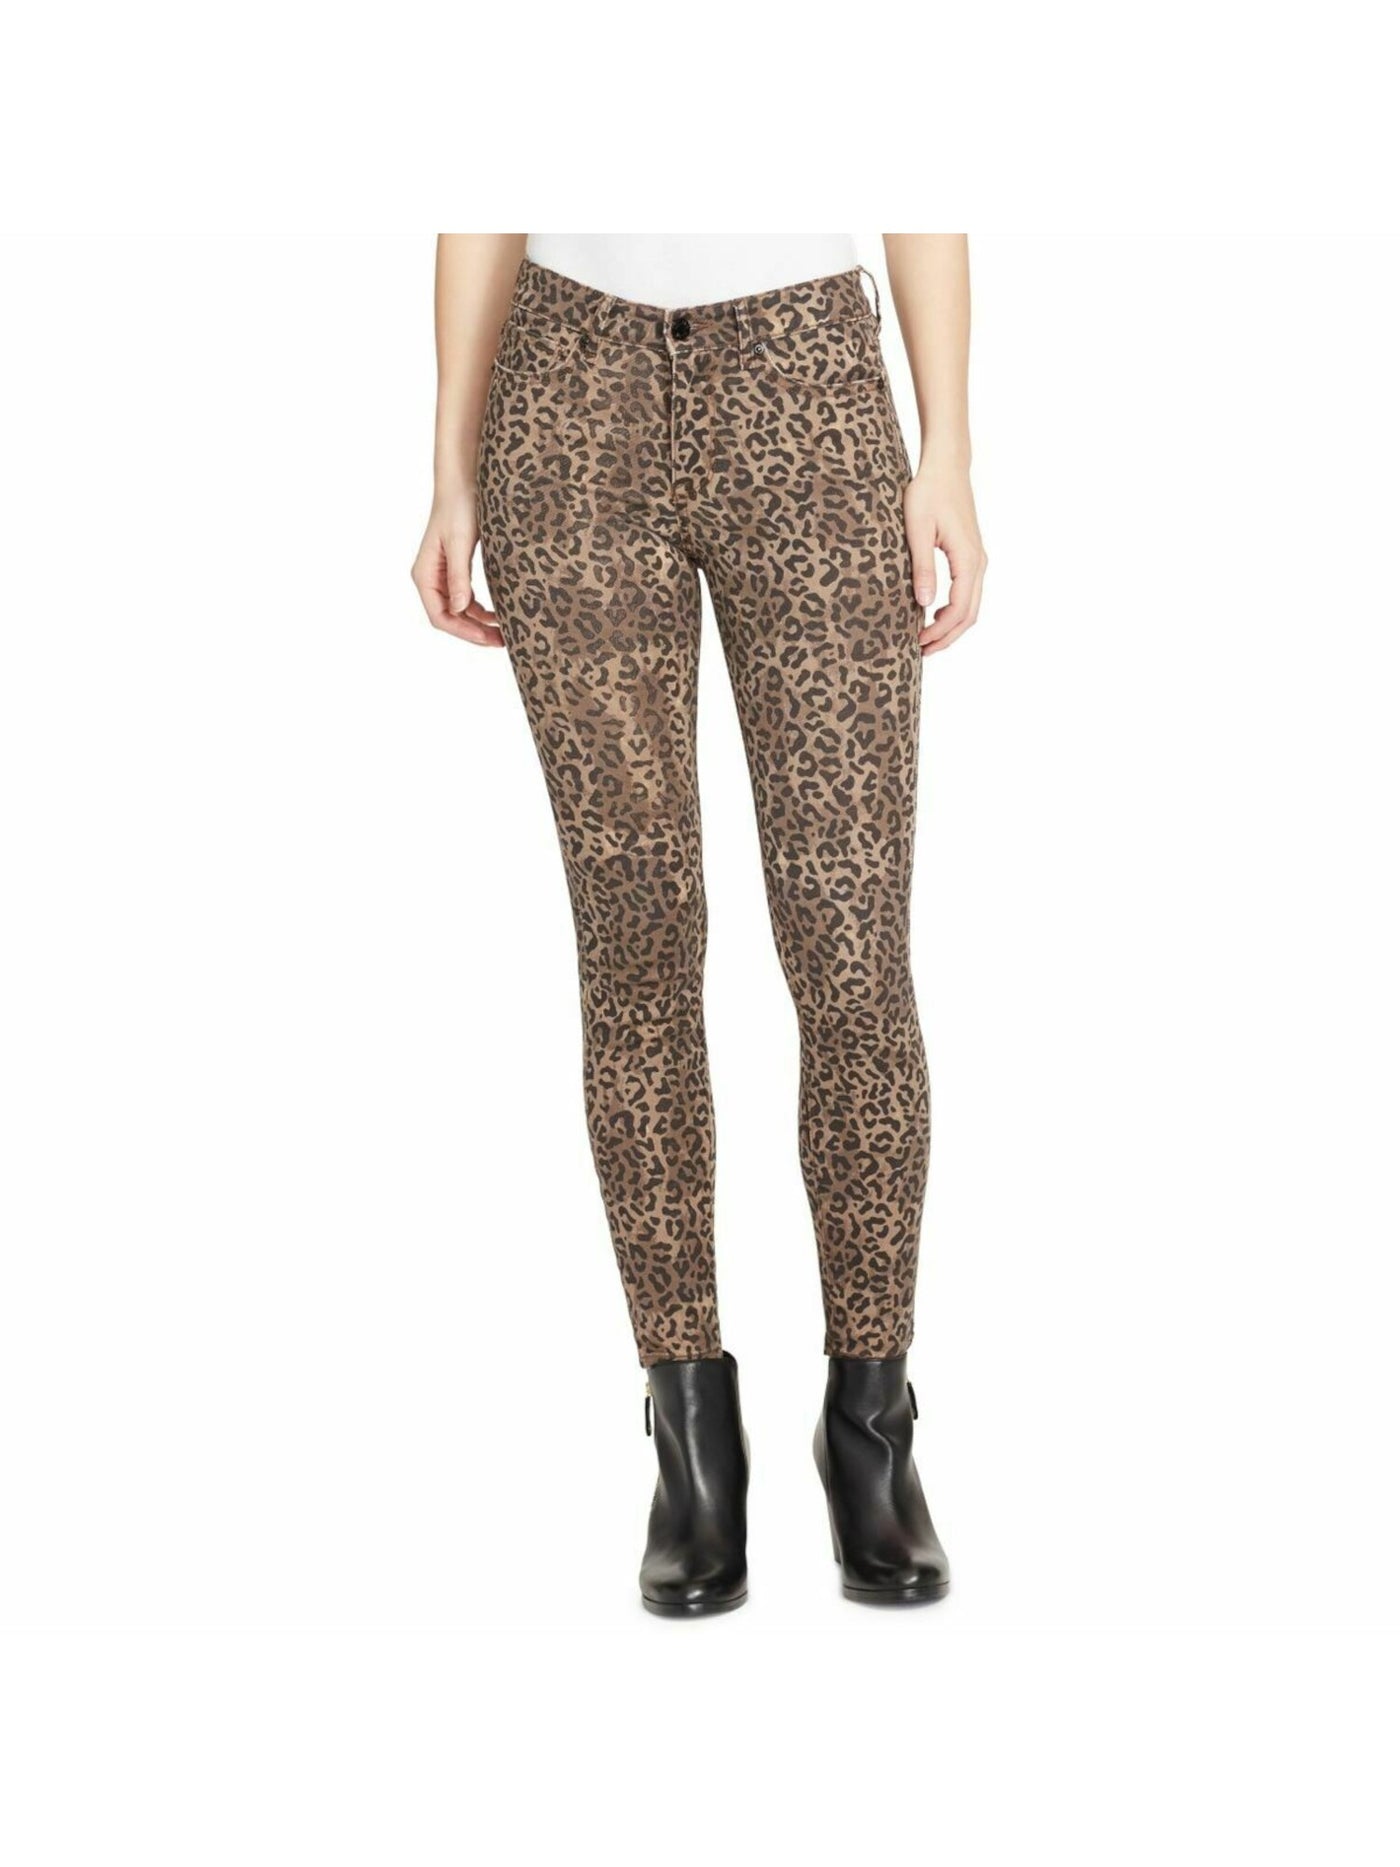 WILLIAM RAST Womens Brown Stretch Pocketed Zippered Mid Rise Animal Print Skinny Jeans Juniors 26